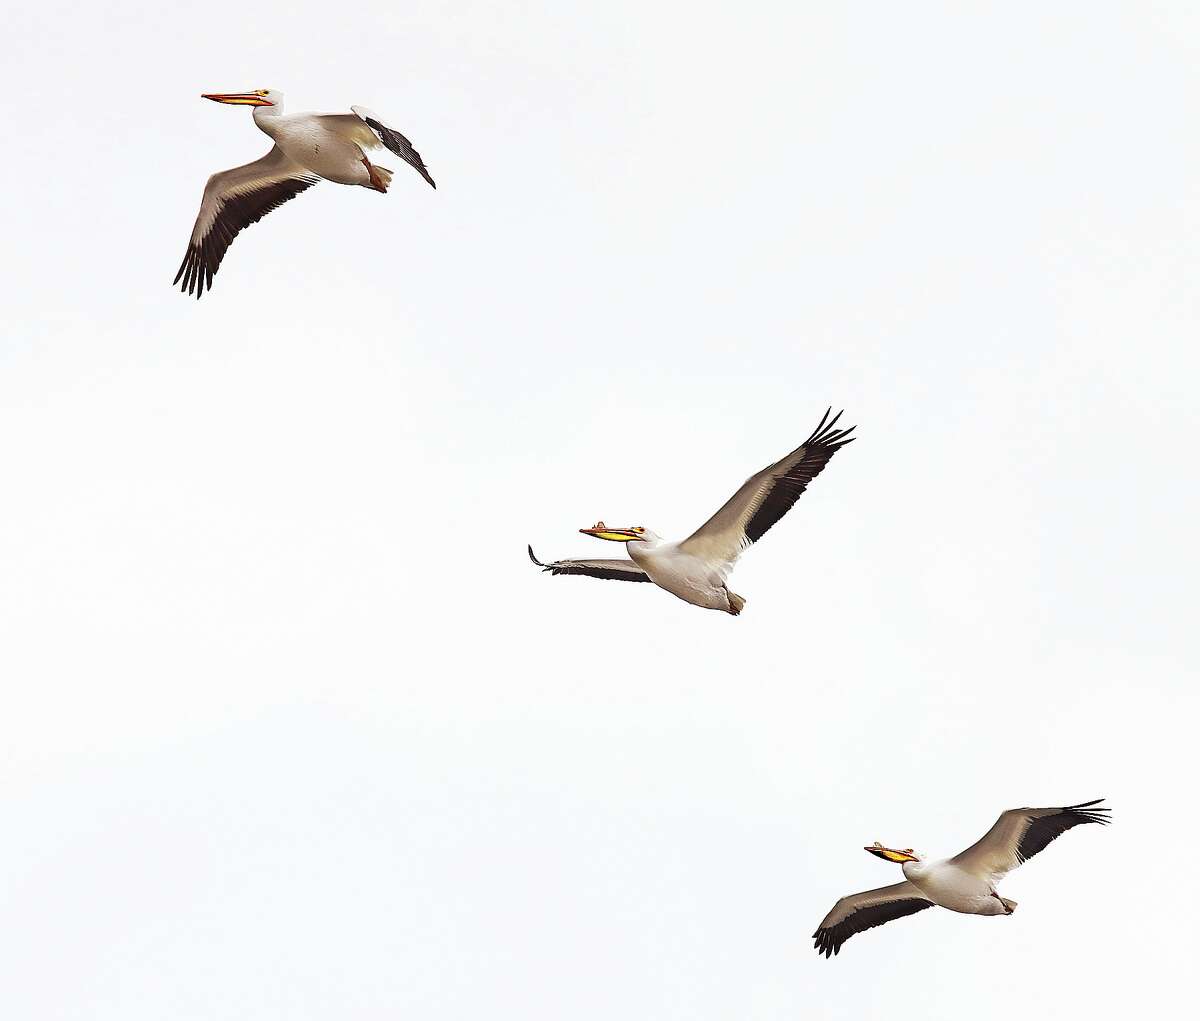 Three pelicans fly toward the Clark Bridge Thursday where dozens of other pelicans were circling in the sky. Perhaps they were arriving for Earth Day 2022 which is on April 22 every year. Friday marks the 52nd annual Earth Day which started in 1970.